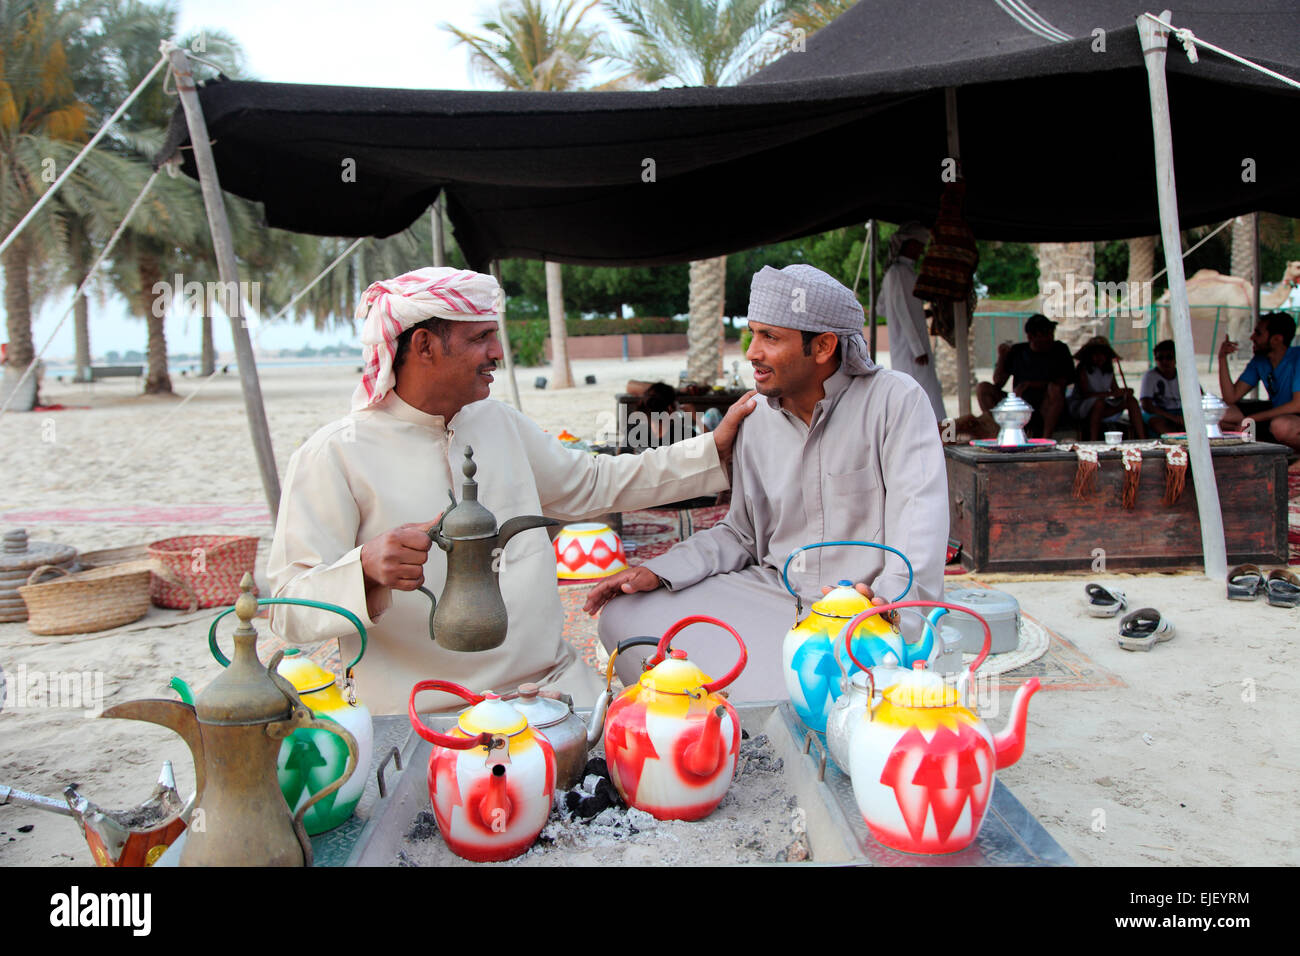 Teatime at the Bedouin camp on the Emirates Palace Beach Abu Dhabi Stock Photo